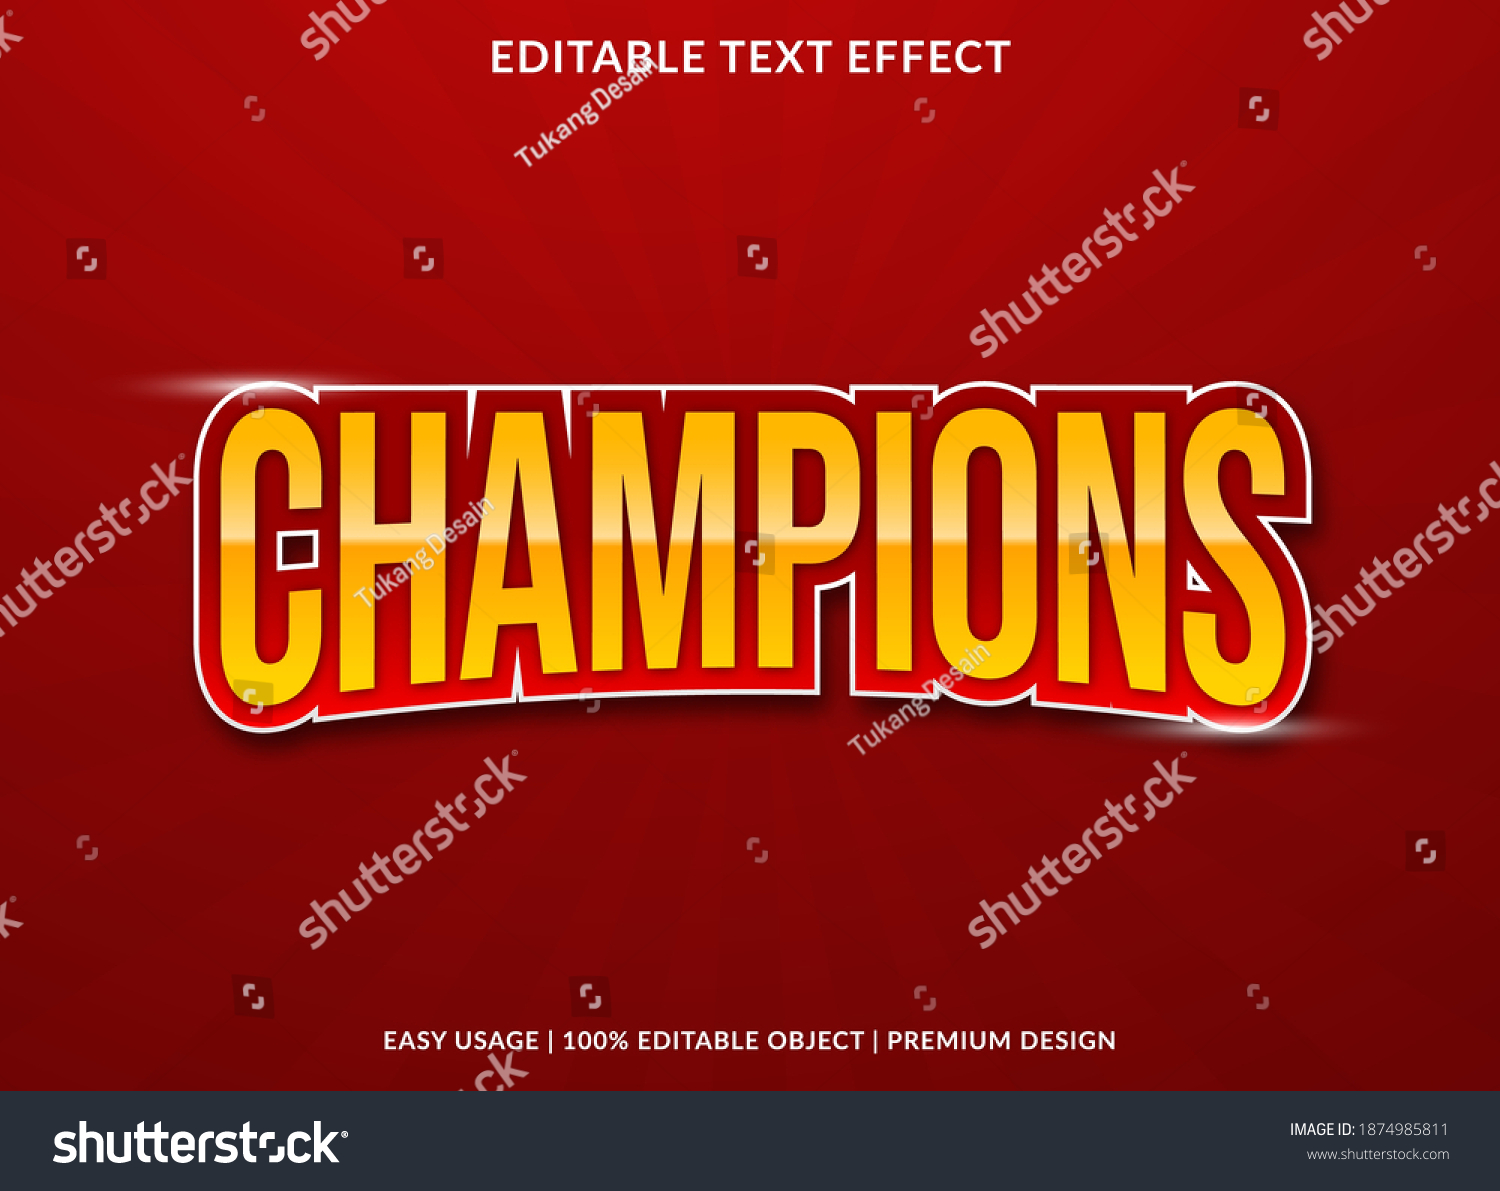 champions text effect with bold style use for business brand and logo  #1874985811